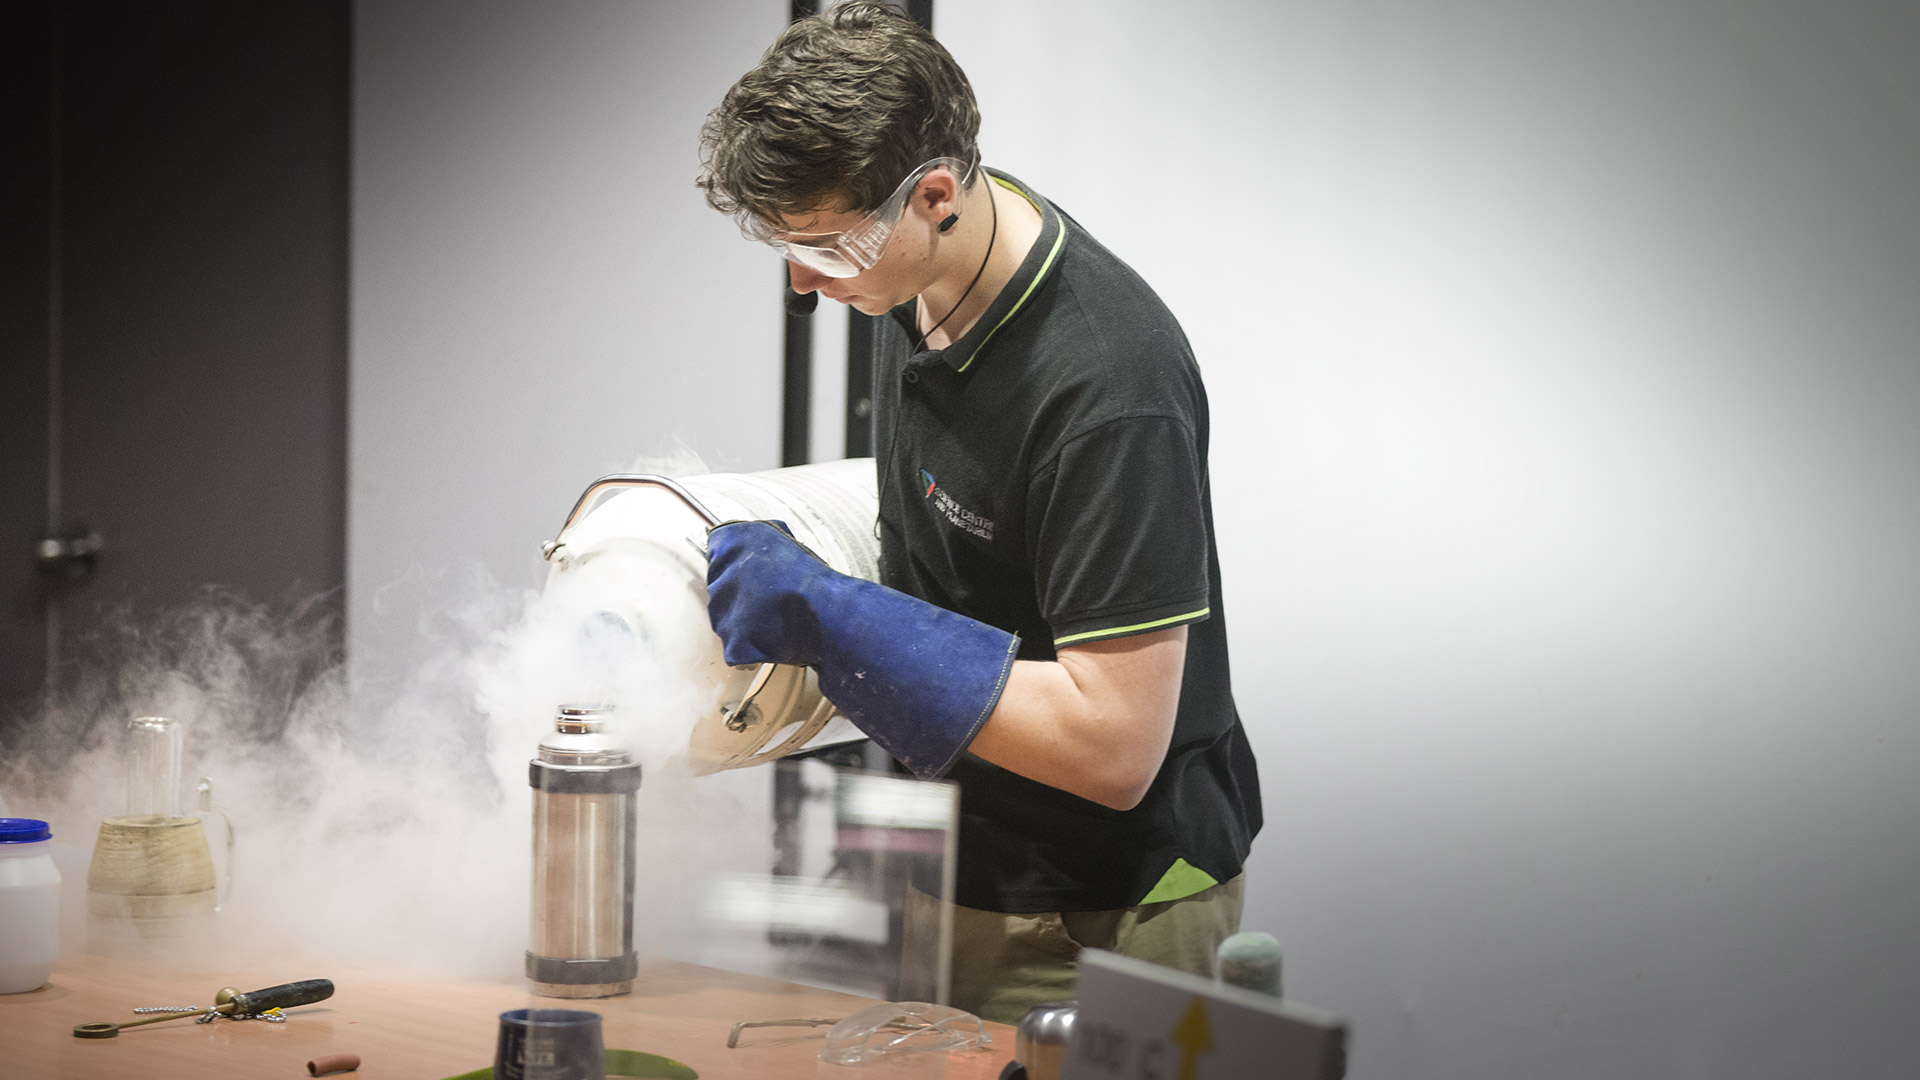 Man in protective gear experimenting with Liquid Nitrogen